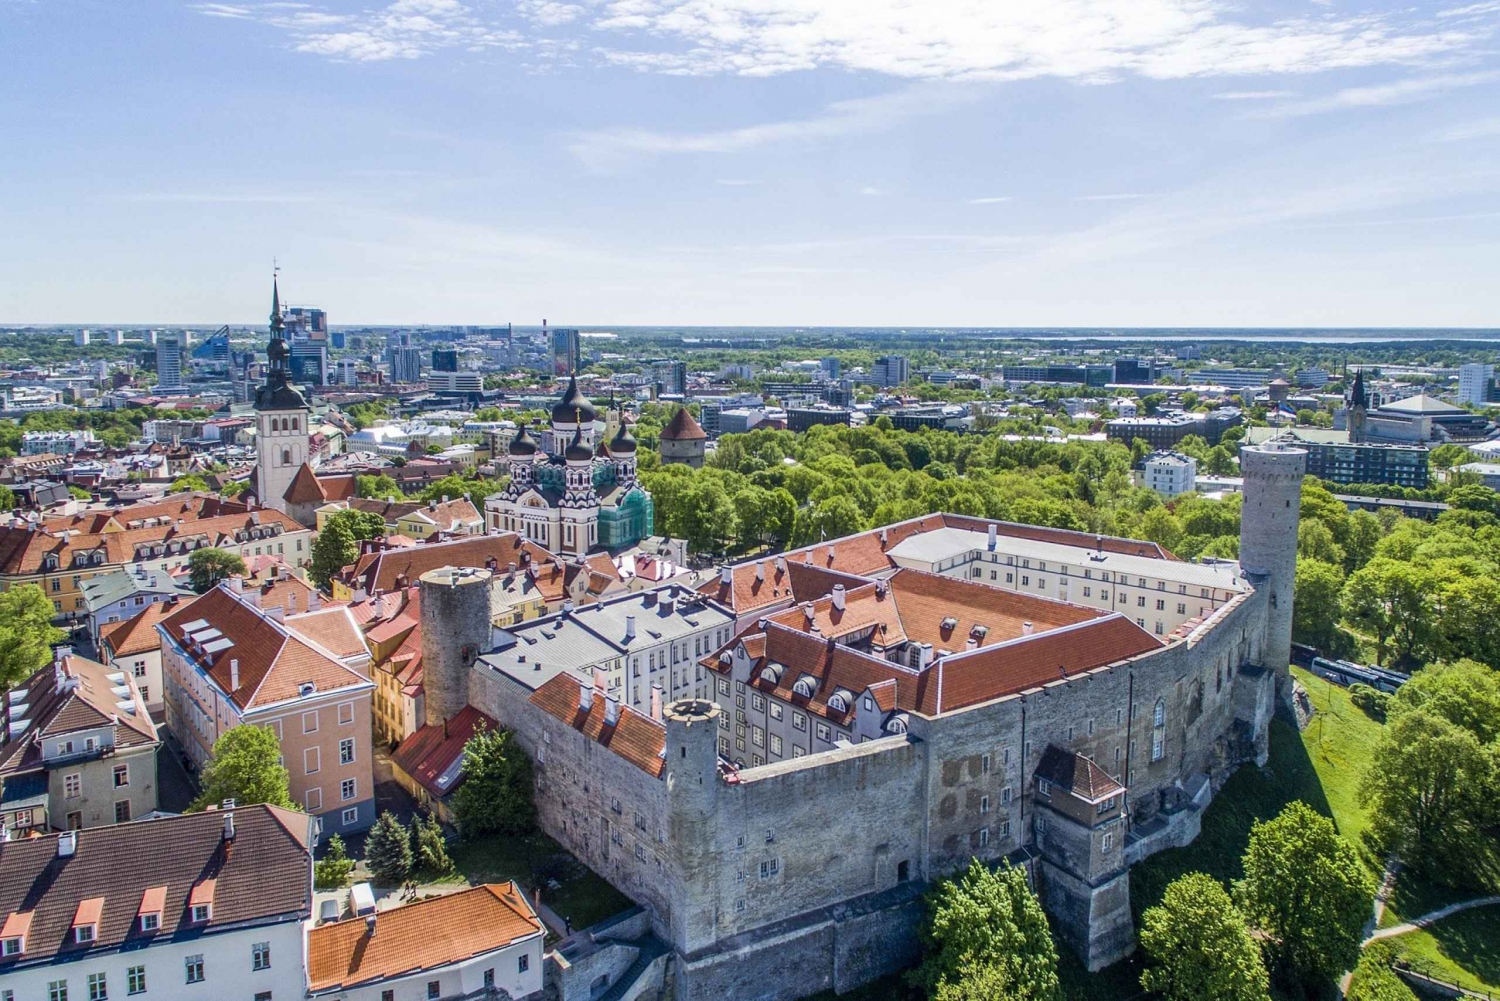 From Riga: Private Transfer to Tallinn with Sightseeing